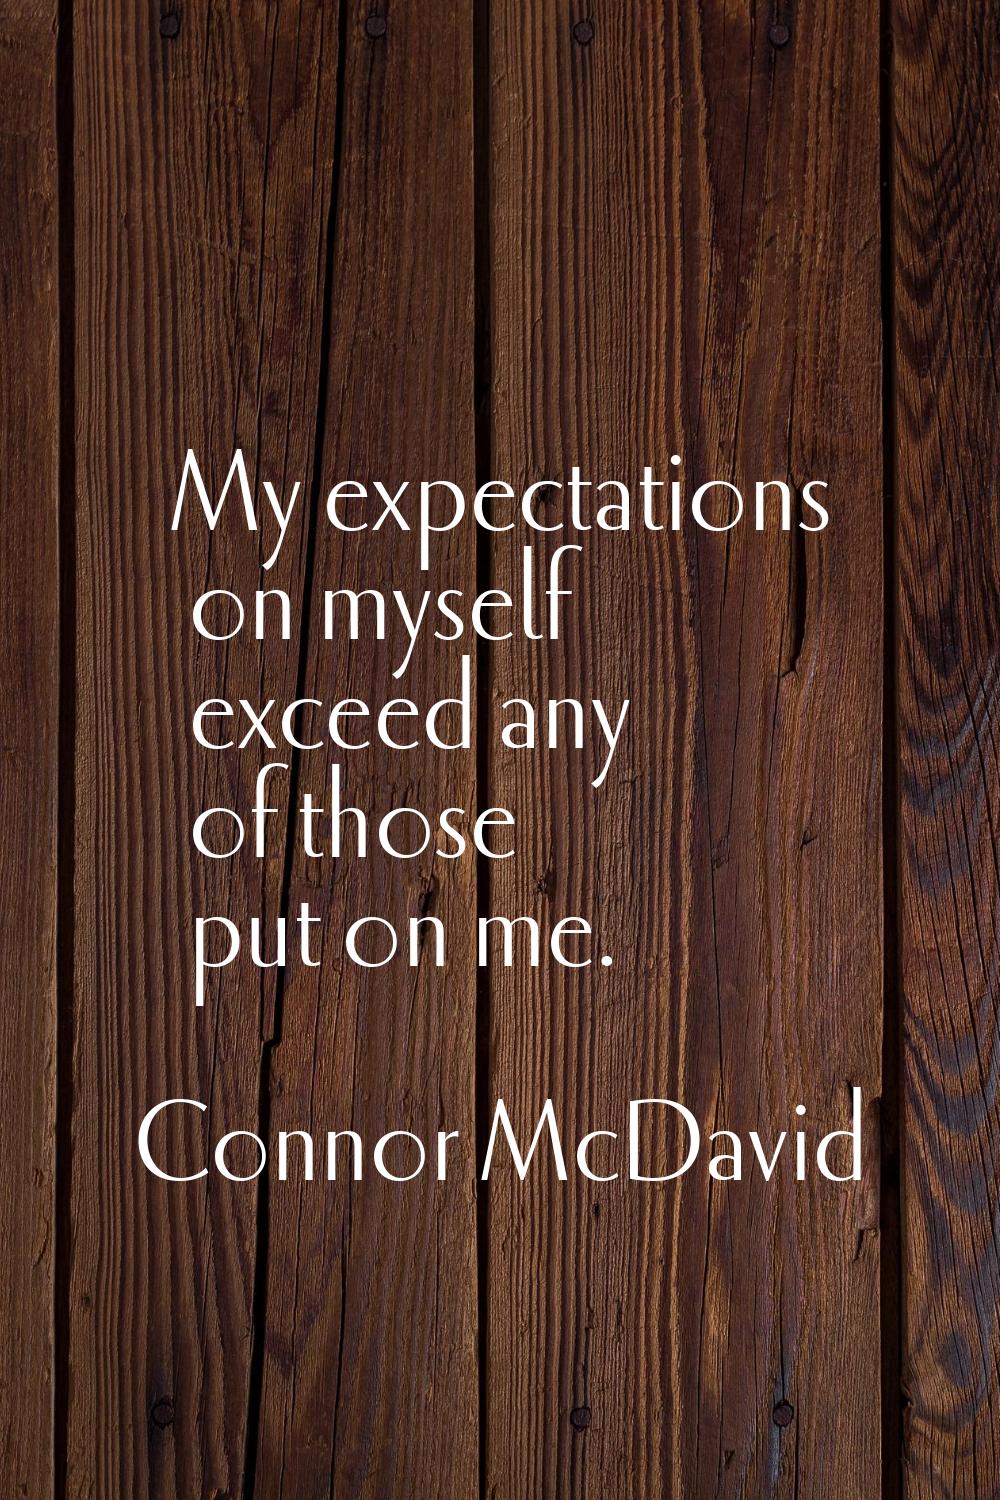 My expectations on myself exceed any of those put on me.